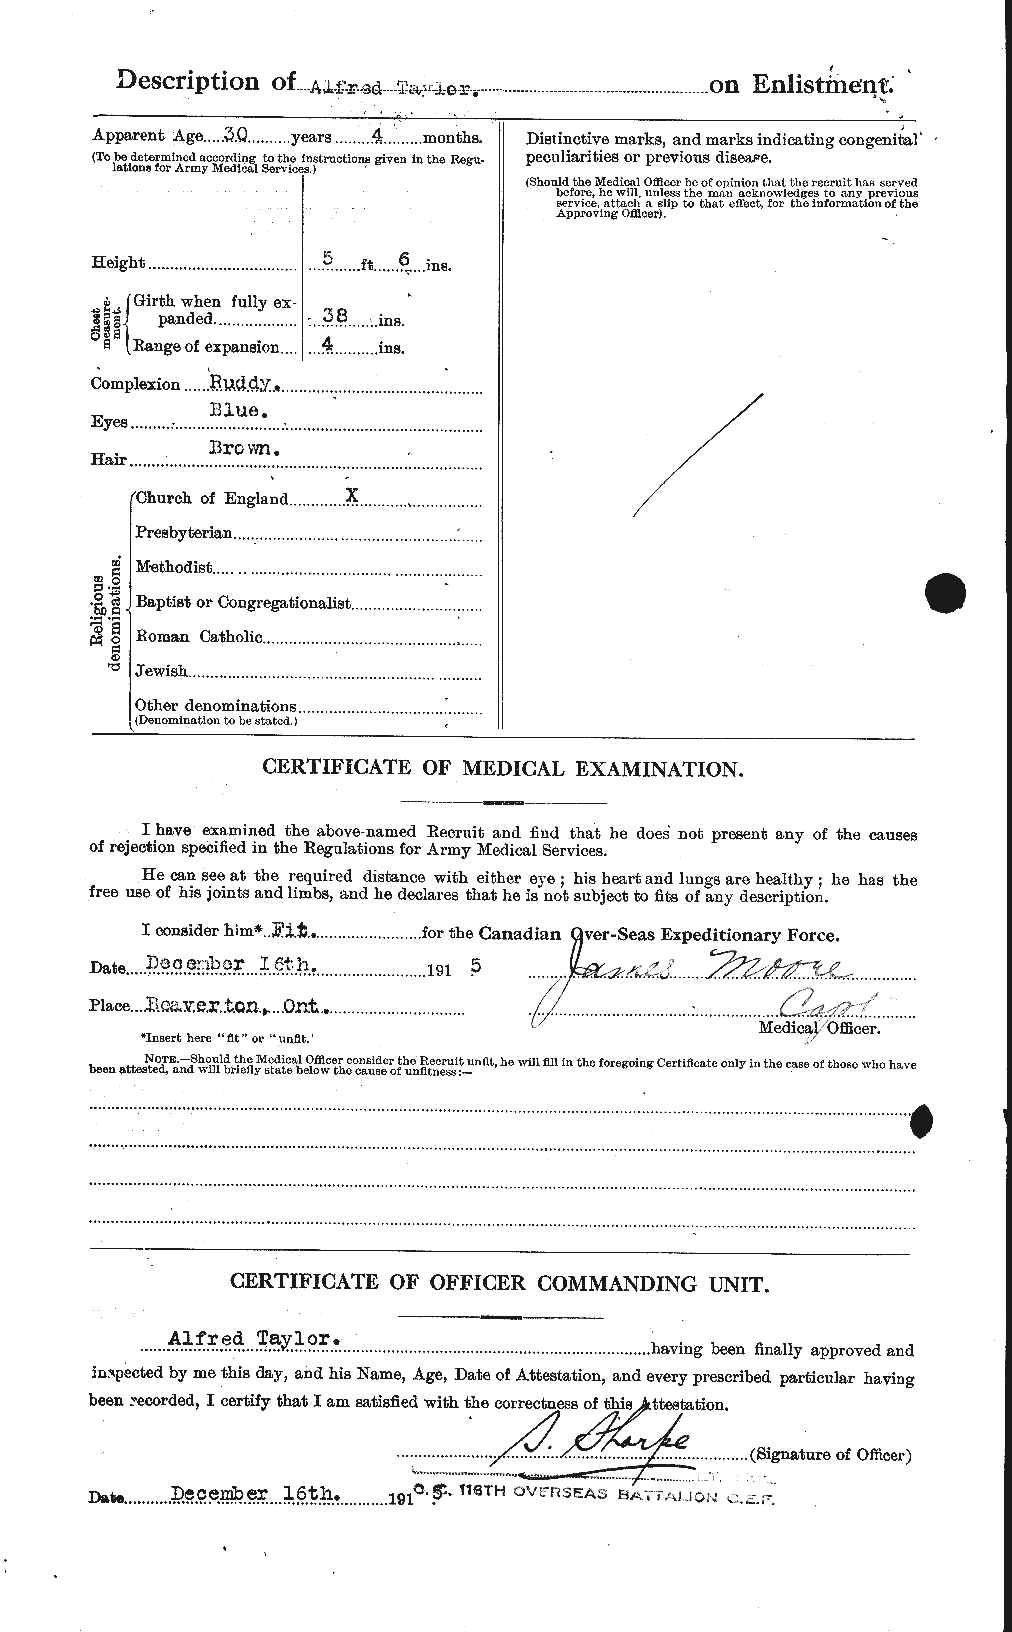 Personnel Records of the First World War - CEF 626173b